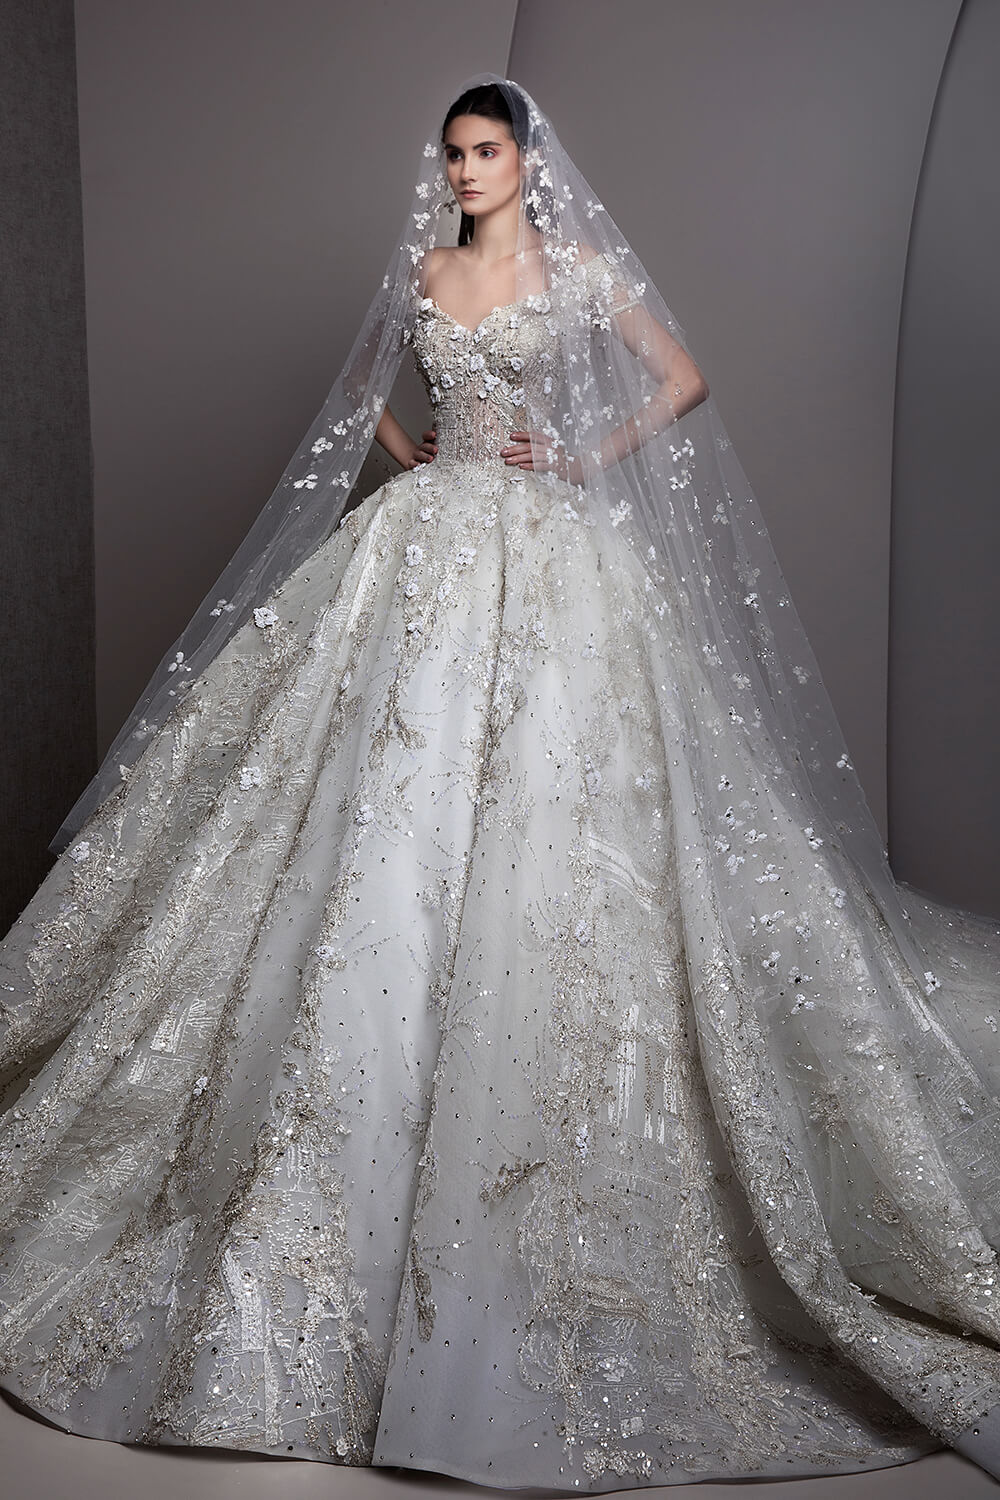 Royal off-white ball gown